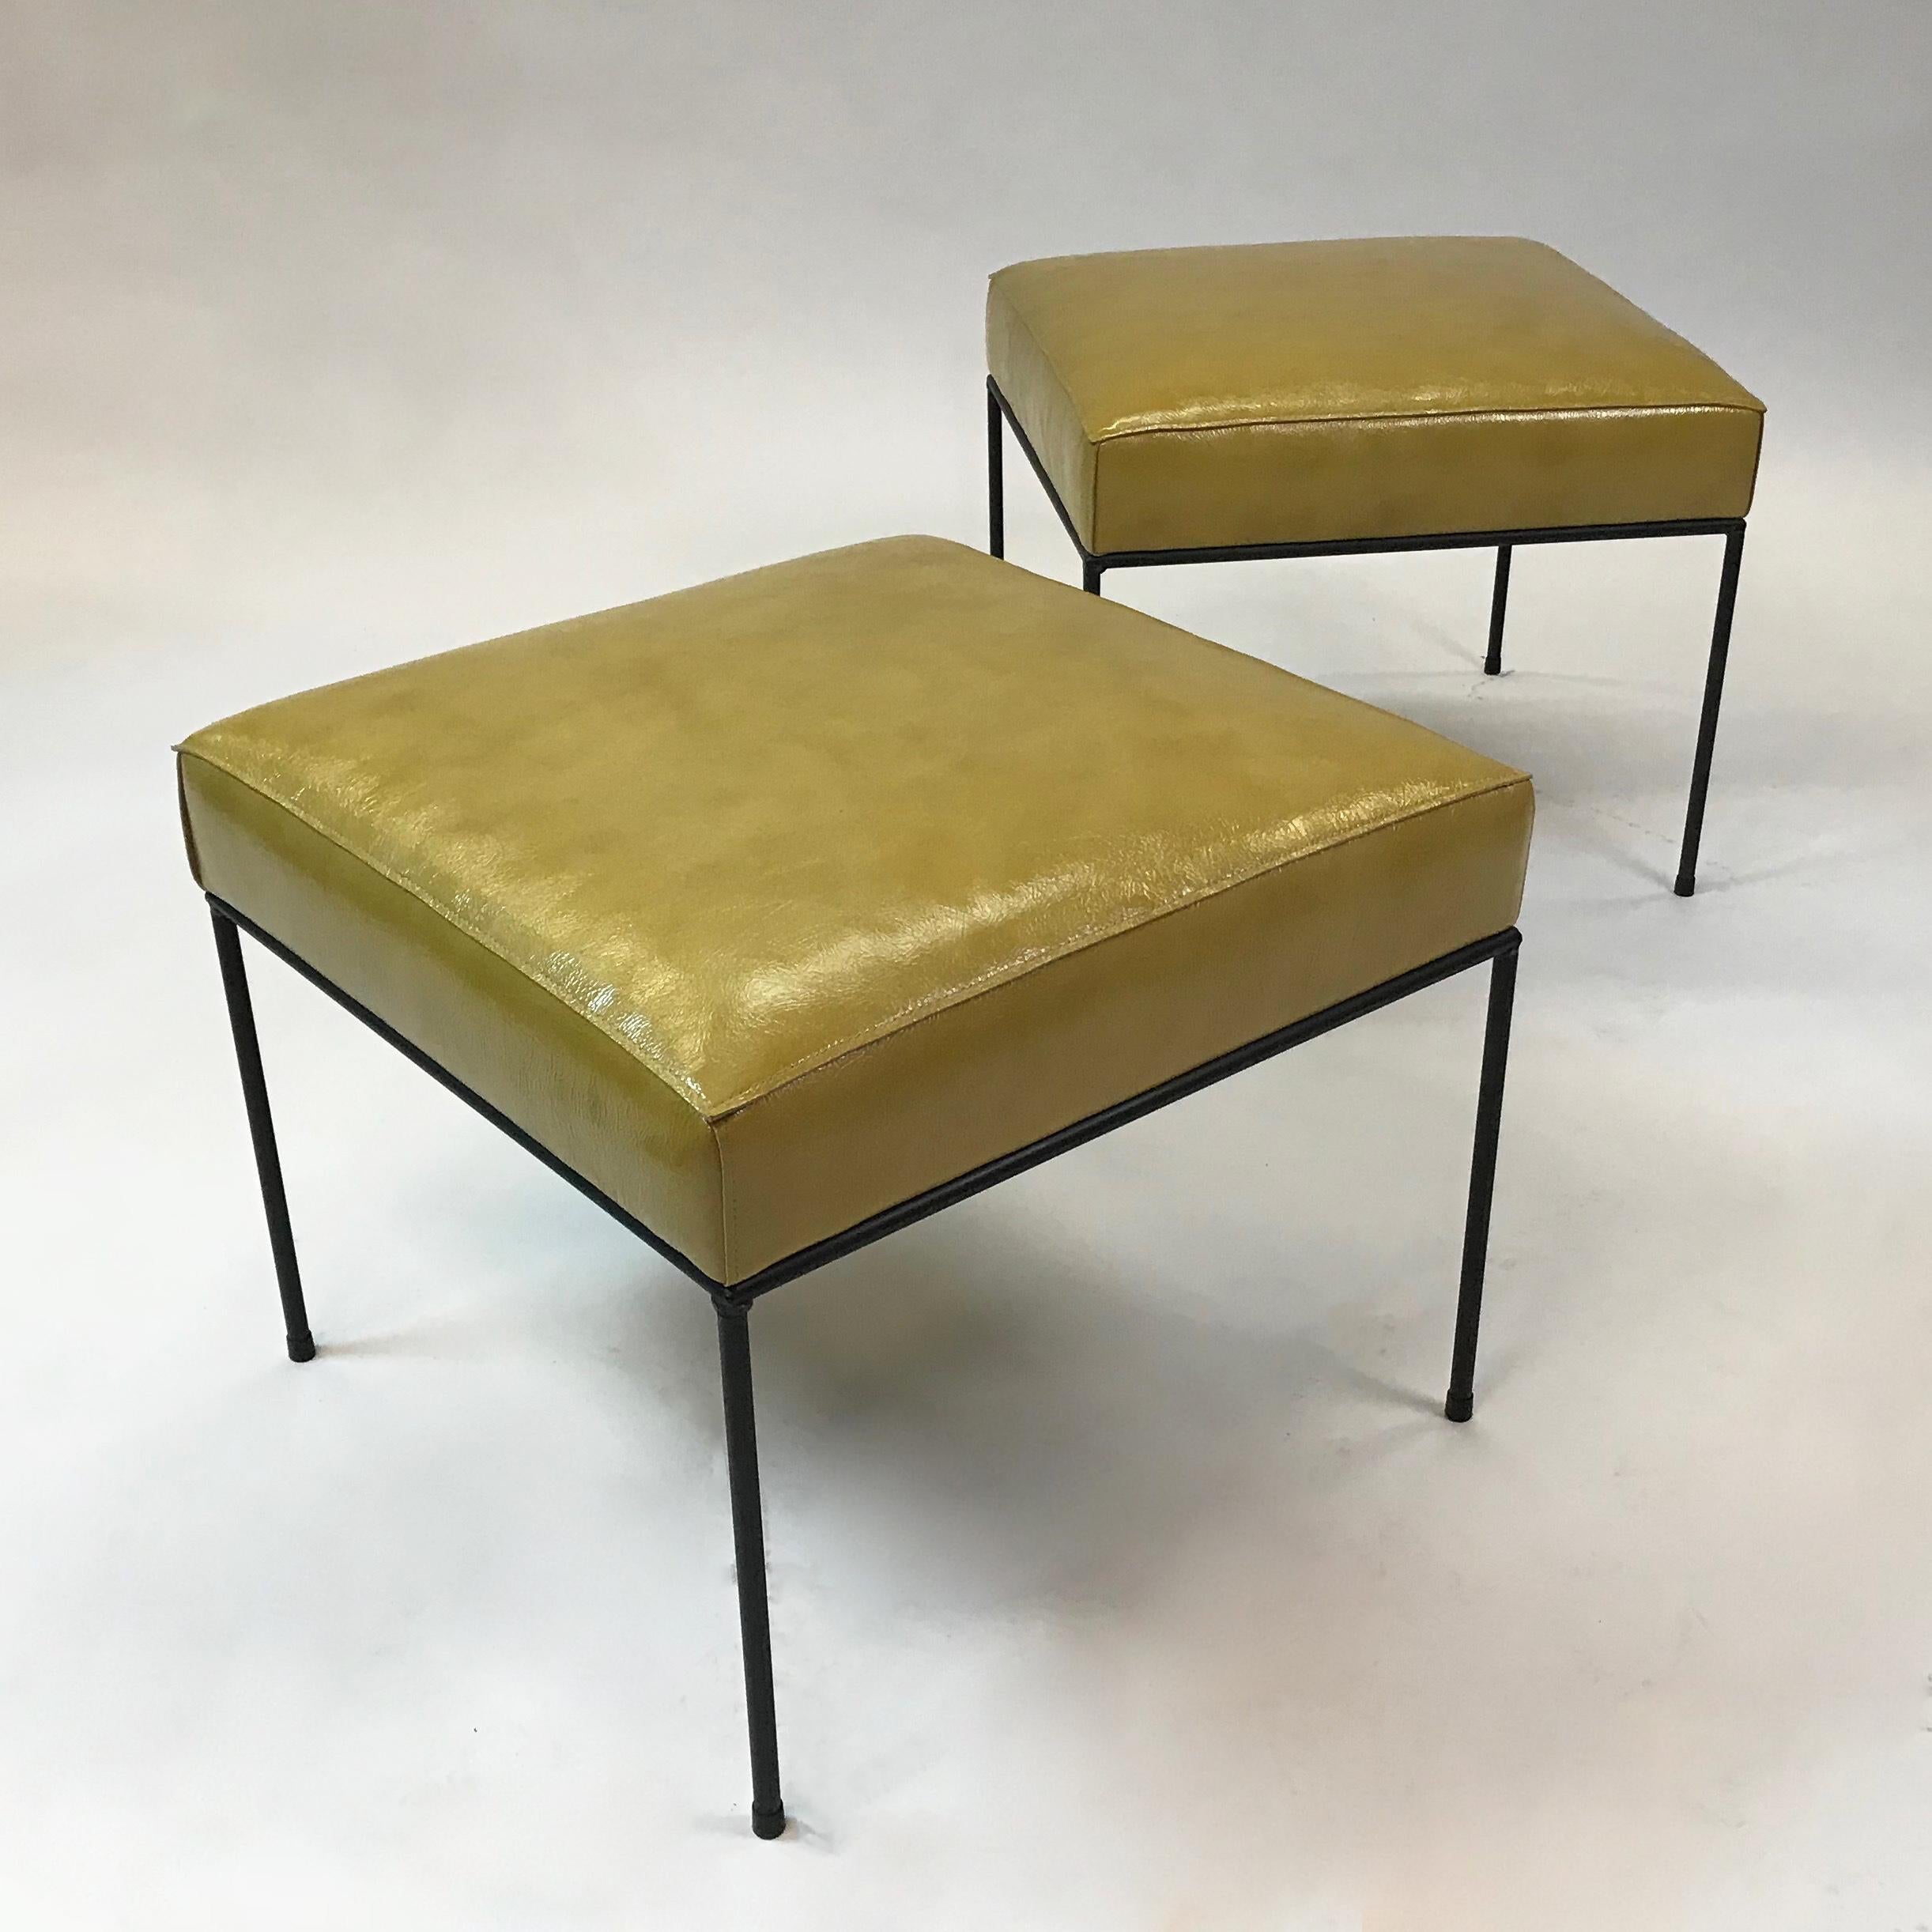 Pair of Mid-Century Modern, low-profile, square ottomans, stools or benches by Paul McCobb feature minimal, black wrought iron frames and are newly upholstered in mustard green, textured leather with live edge upholstery as shown. Listed price is